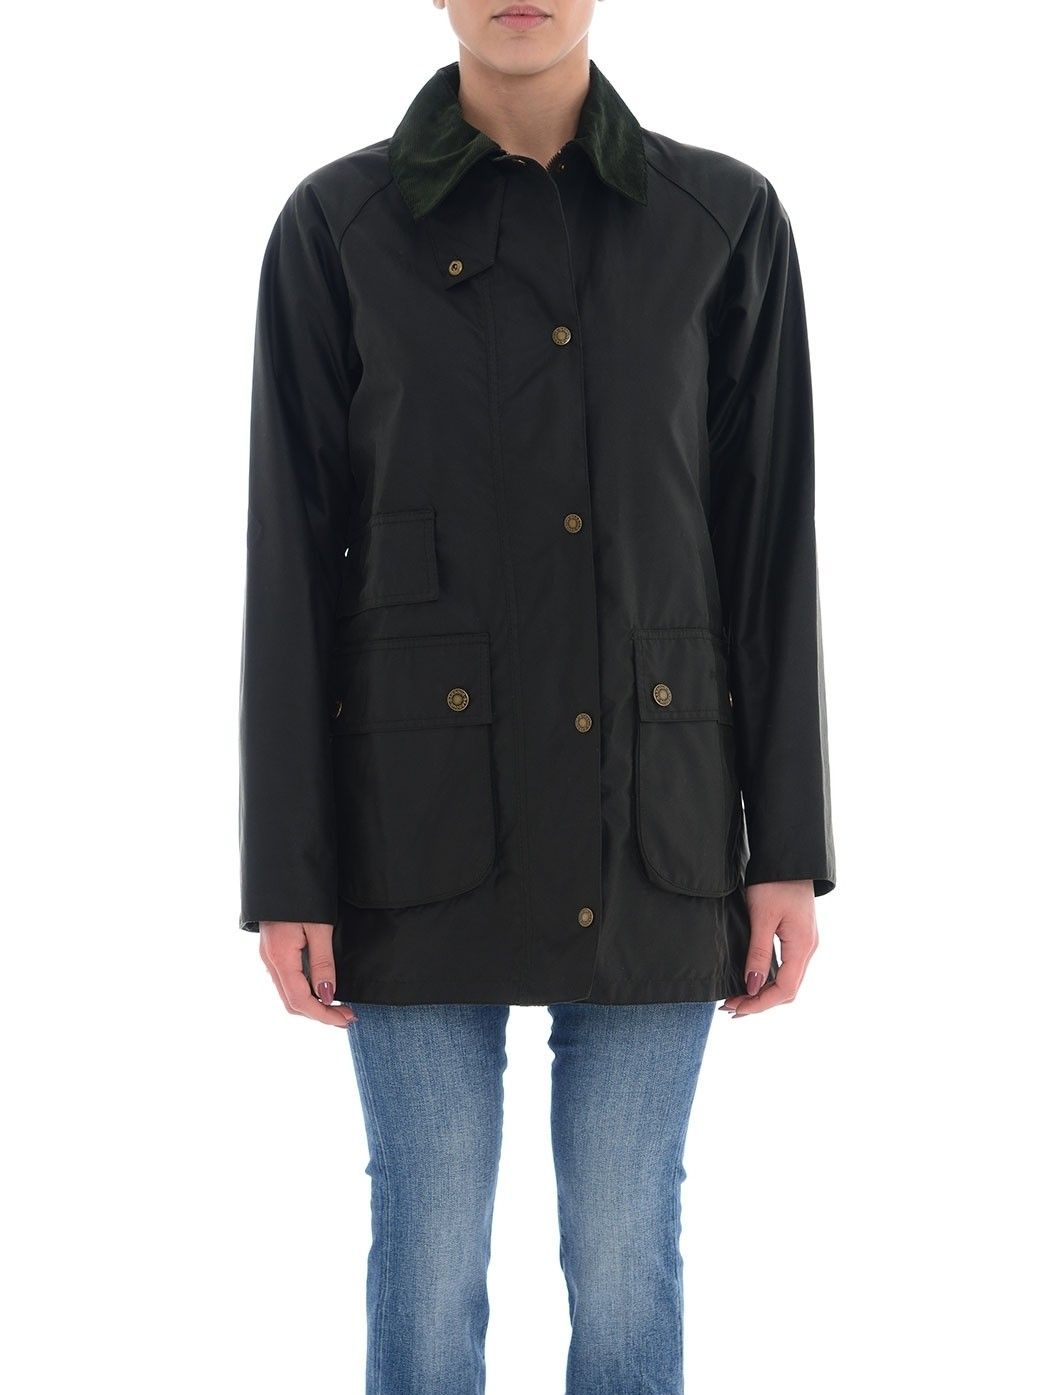  WOMENSWEAR,FALL WINTER COLLECTION  BARBOUR LWX1193